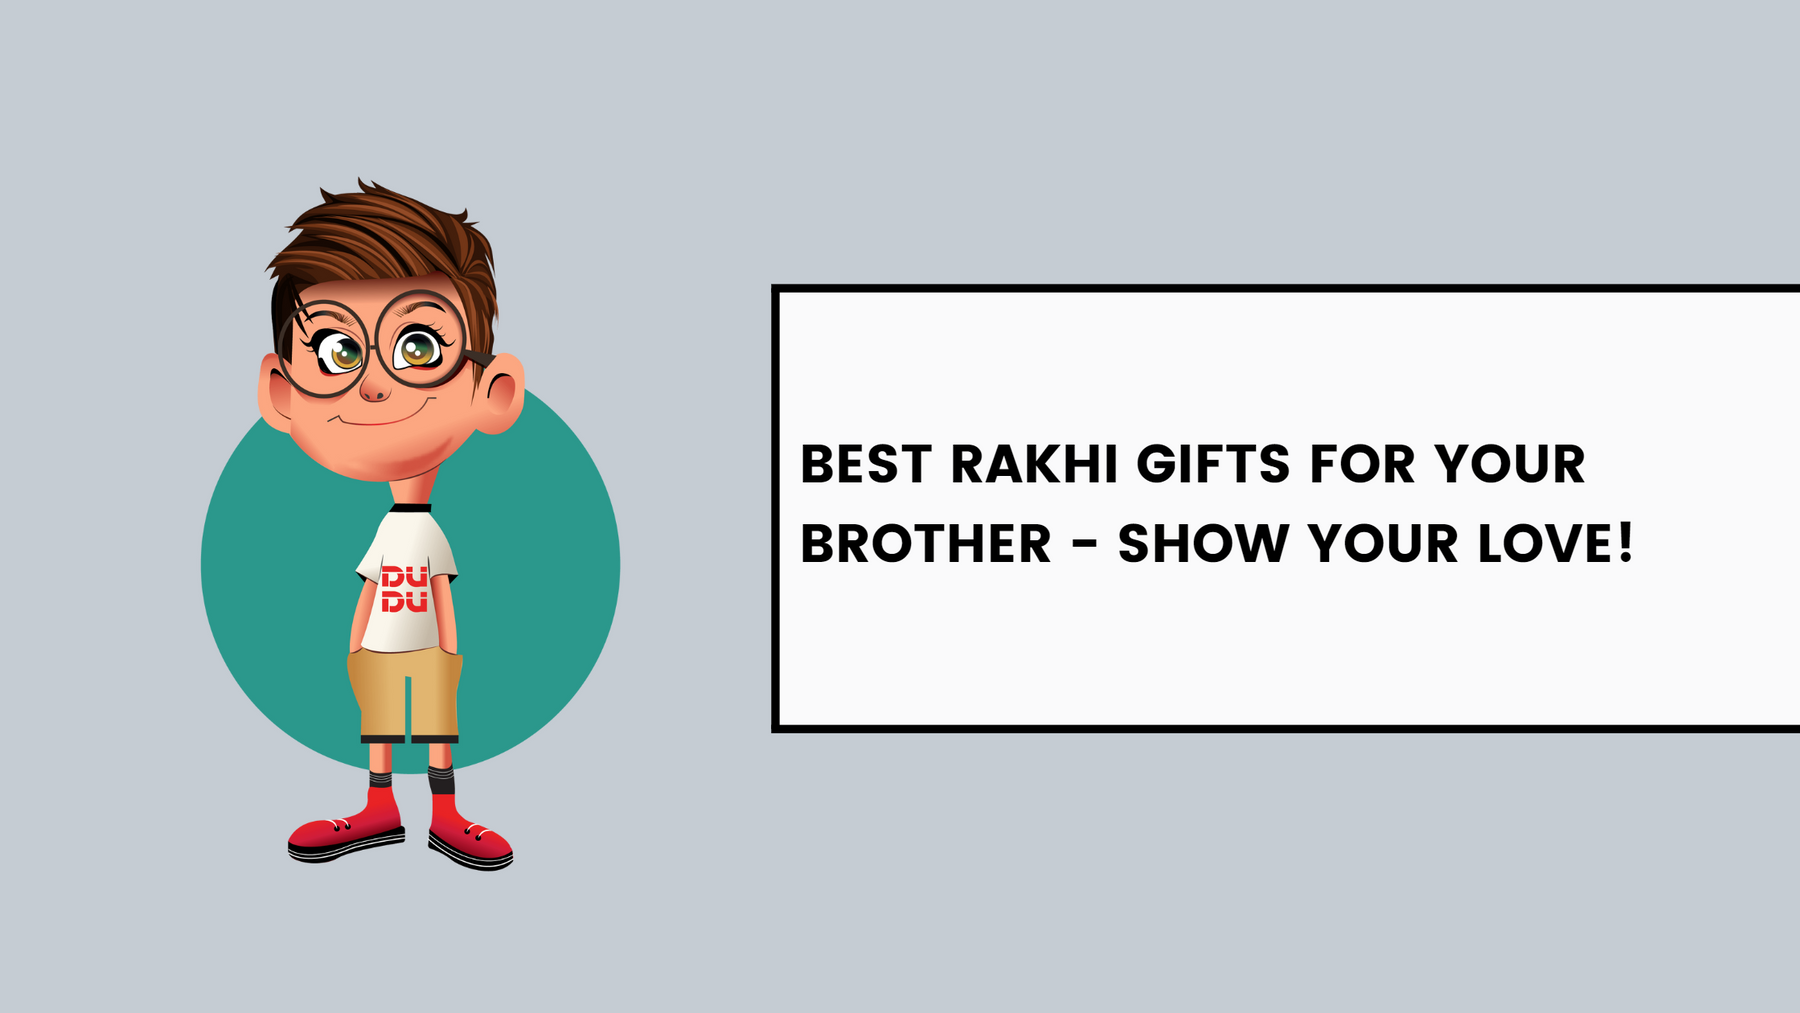 Best Rakhi Gifts For Your Brother - Show Your Love!